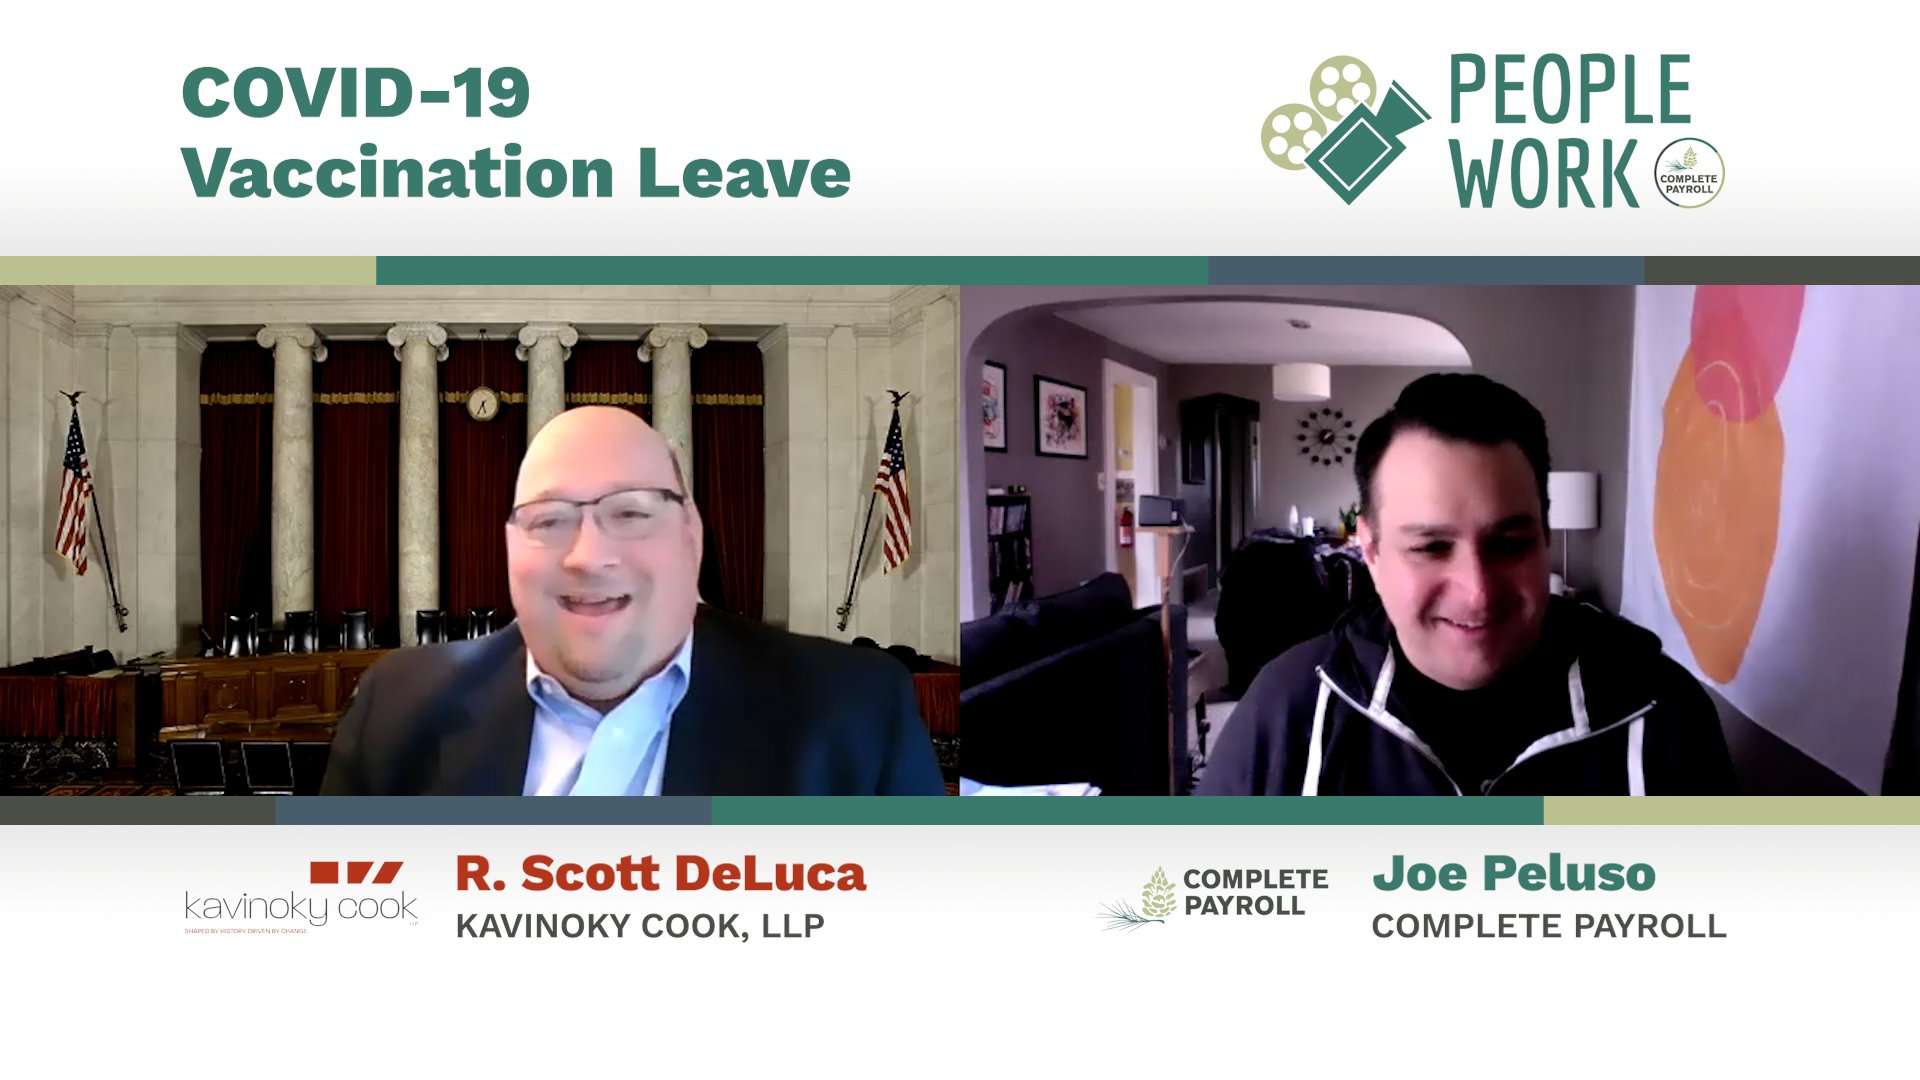 Scott DeLuca from Kavinoky Cook LLP discusses the various COVID-19-related leaves that employers and employees need to be aware of. 